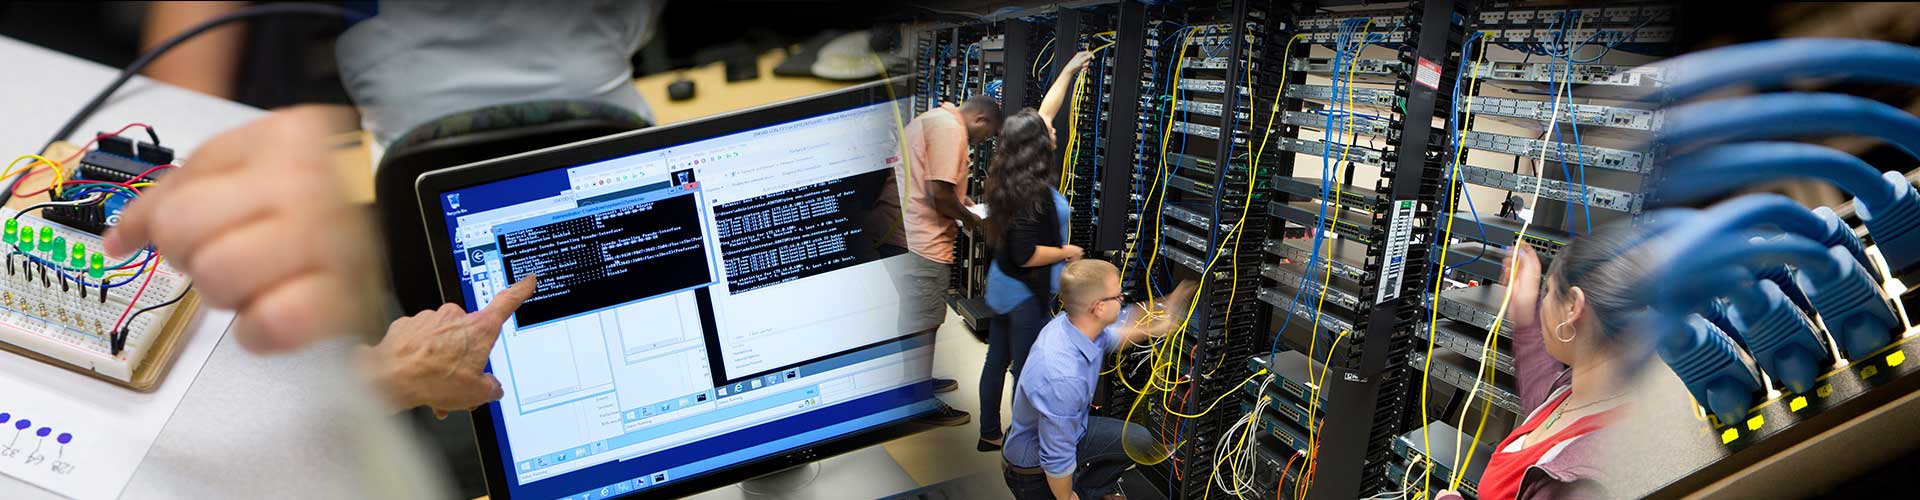 A collage of computer technology images, including system administration tools and computer networking students working on server racks. 